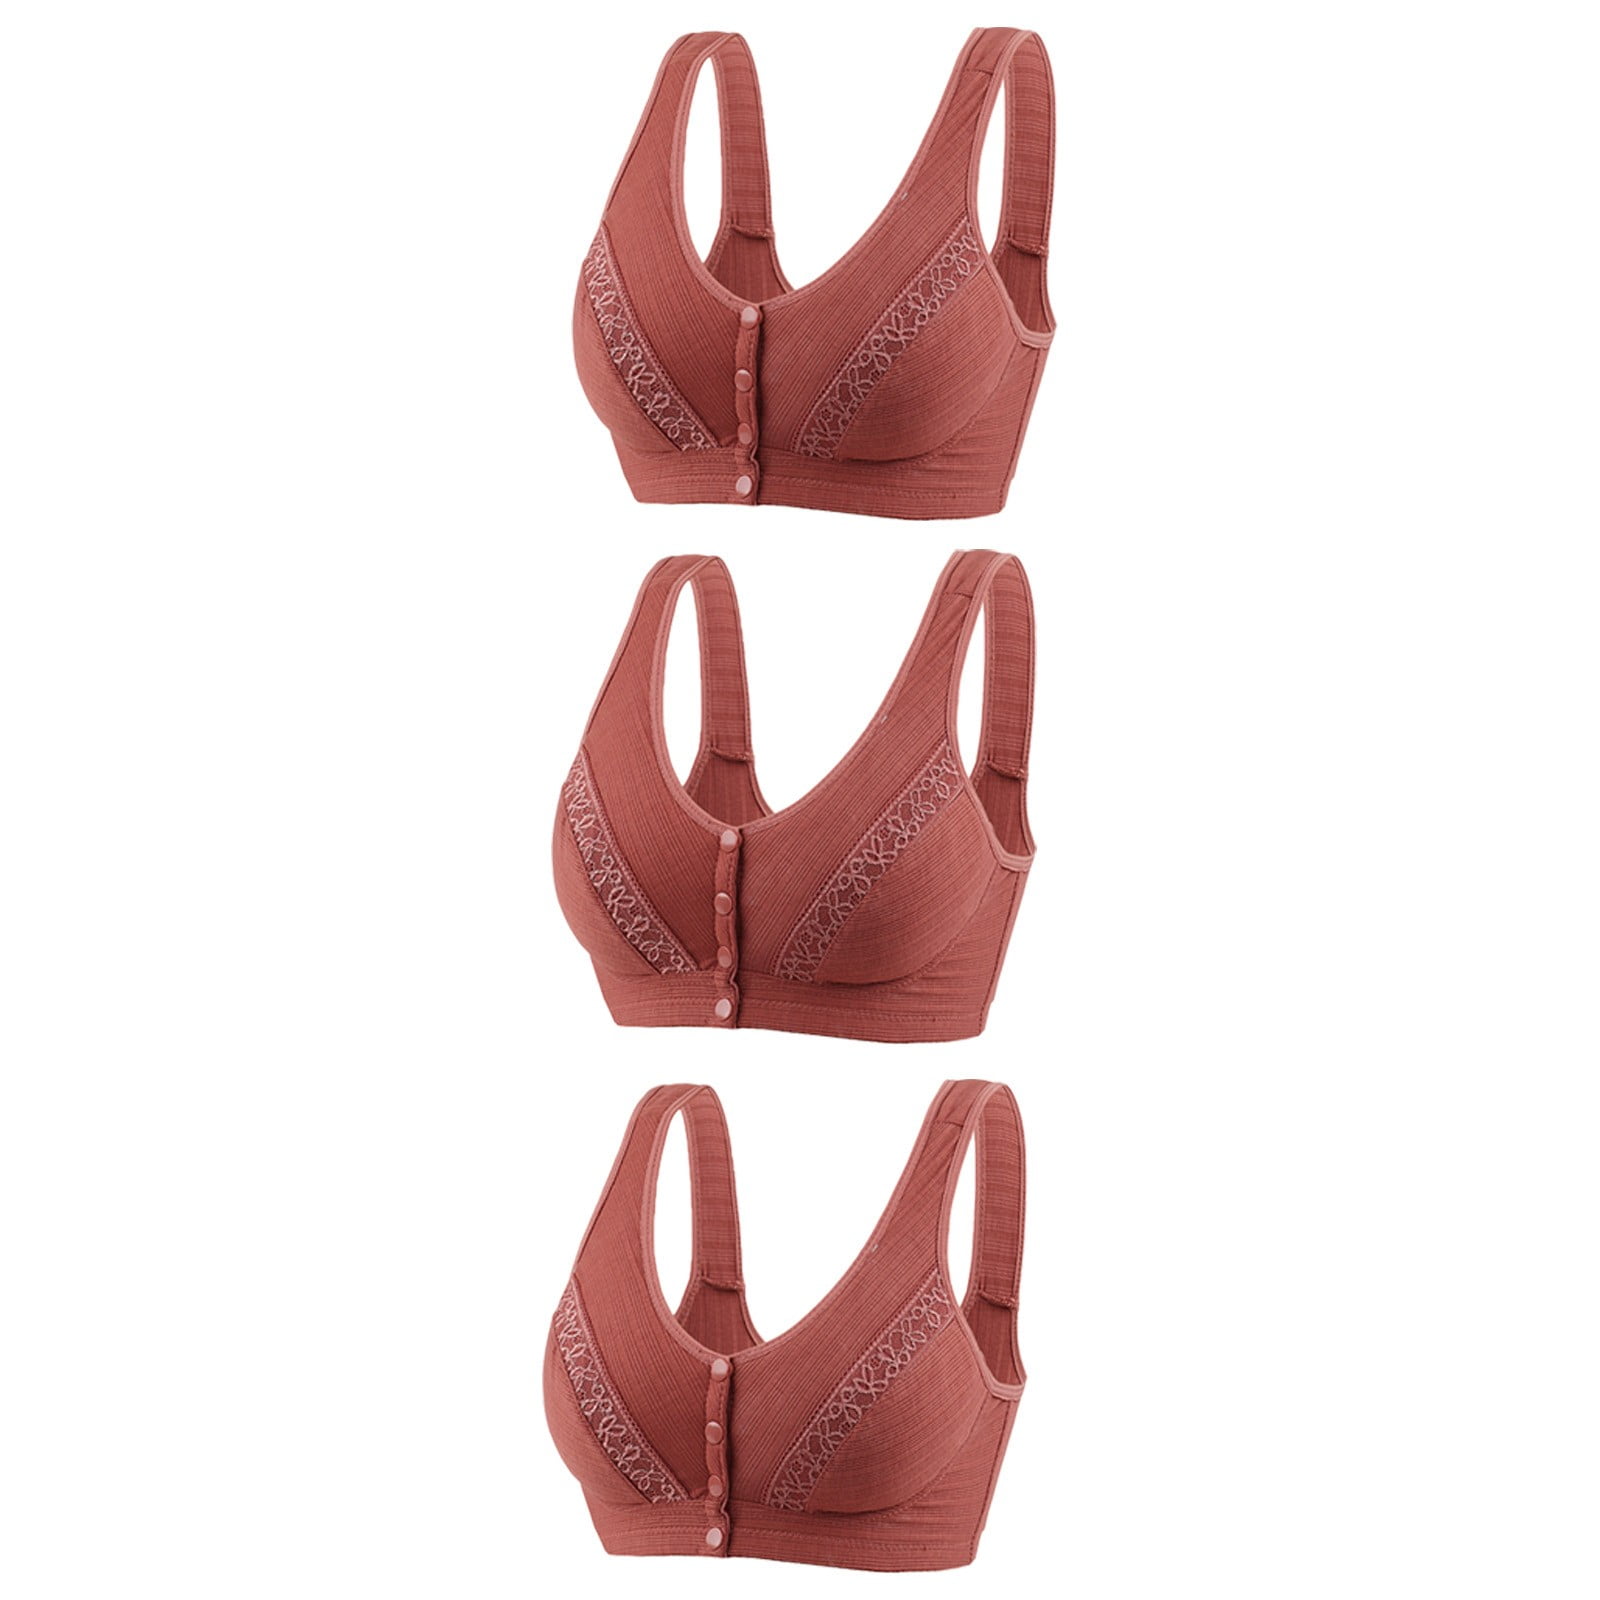 Meichang Bras for Women Wirefree Support T-shirt Bras Seamless